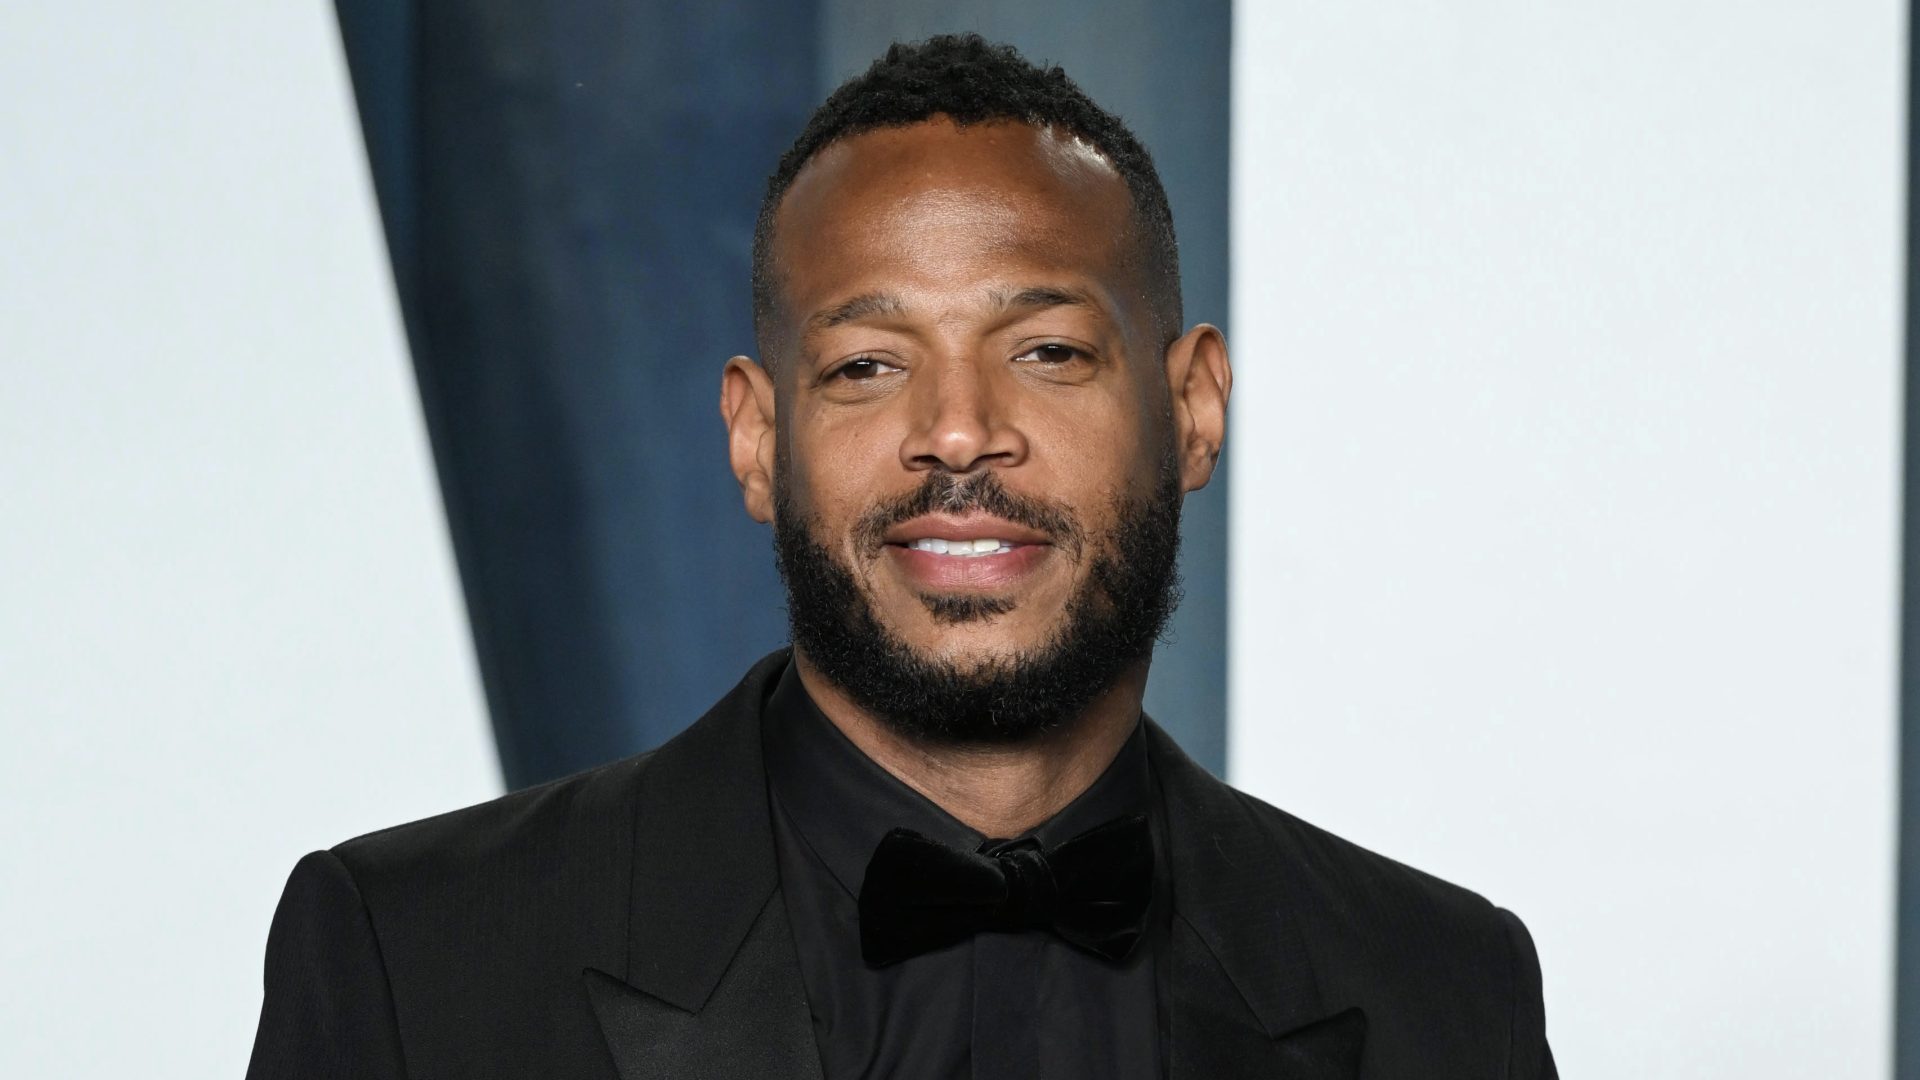 BEVERLY HILLS, CALIFORNIA - MARCH 27: Marlon Wayans attends the 2022 Vanity Fair Oscar Party Hosted by Radhika Jones at Wallis Annenberg Center for the Performing Arts on March 27, 2022 in Beverly Hills, California.